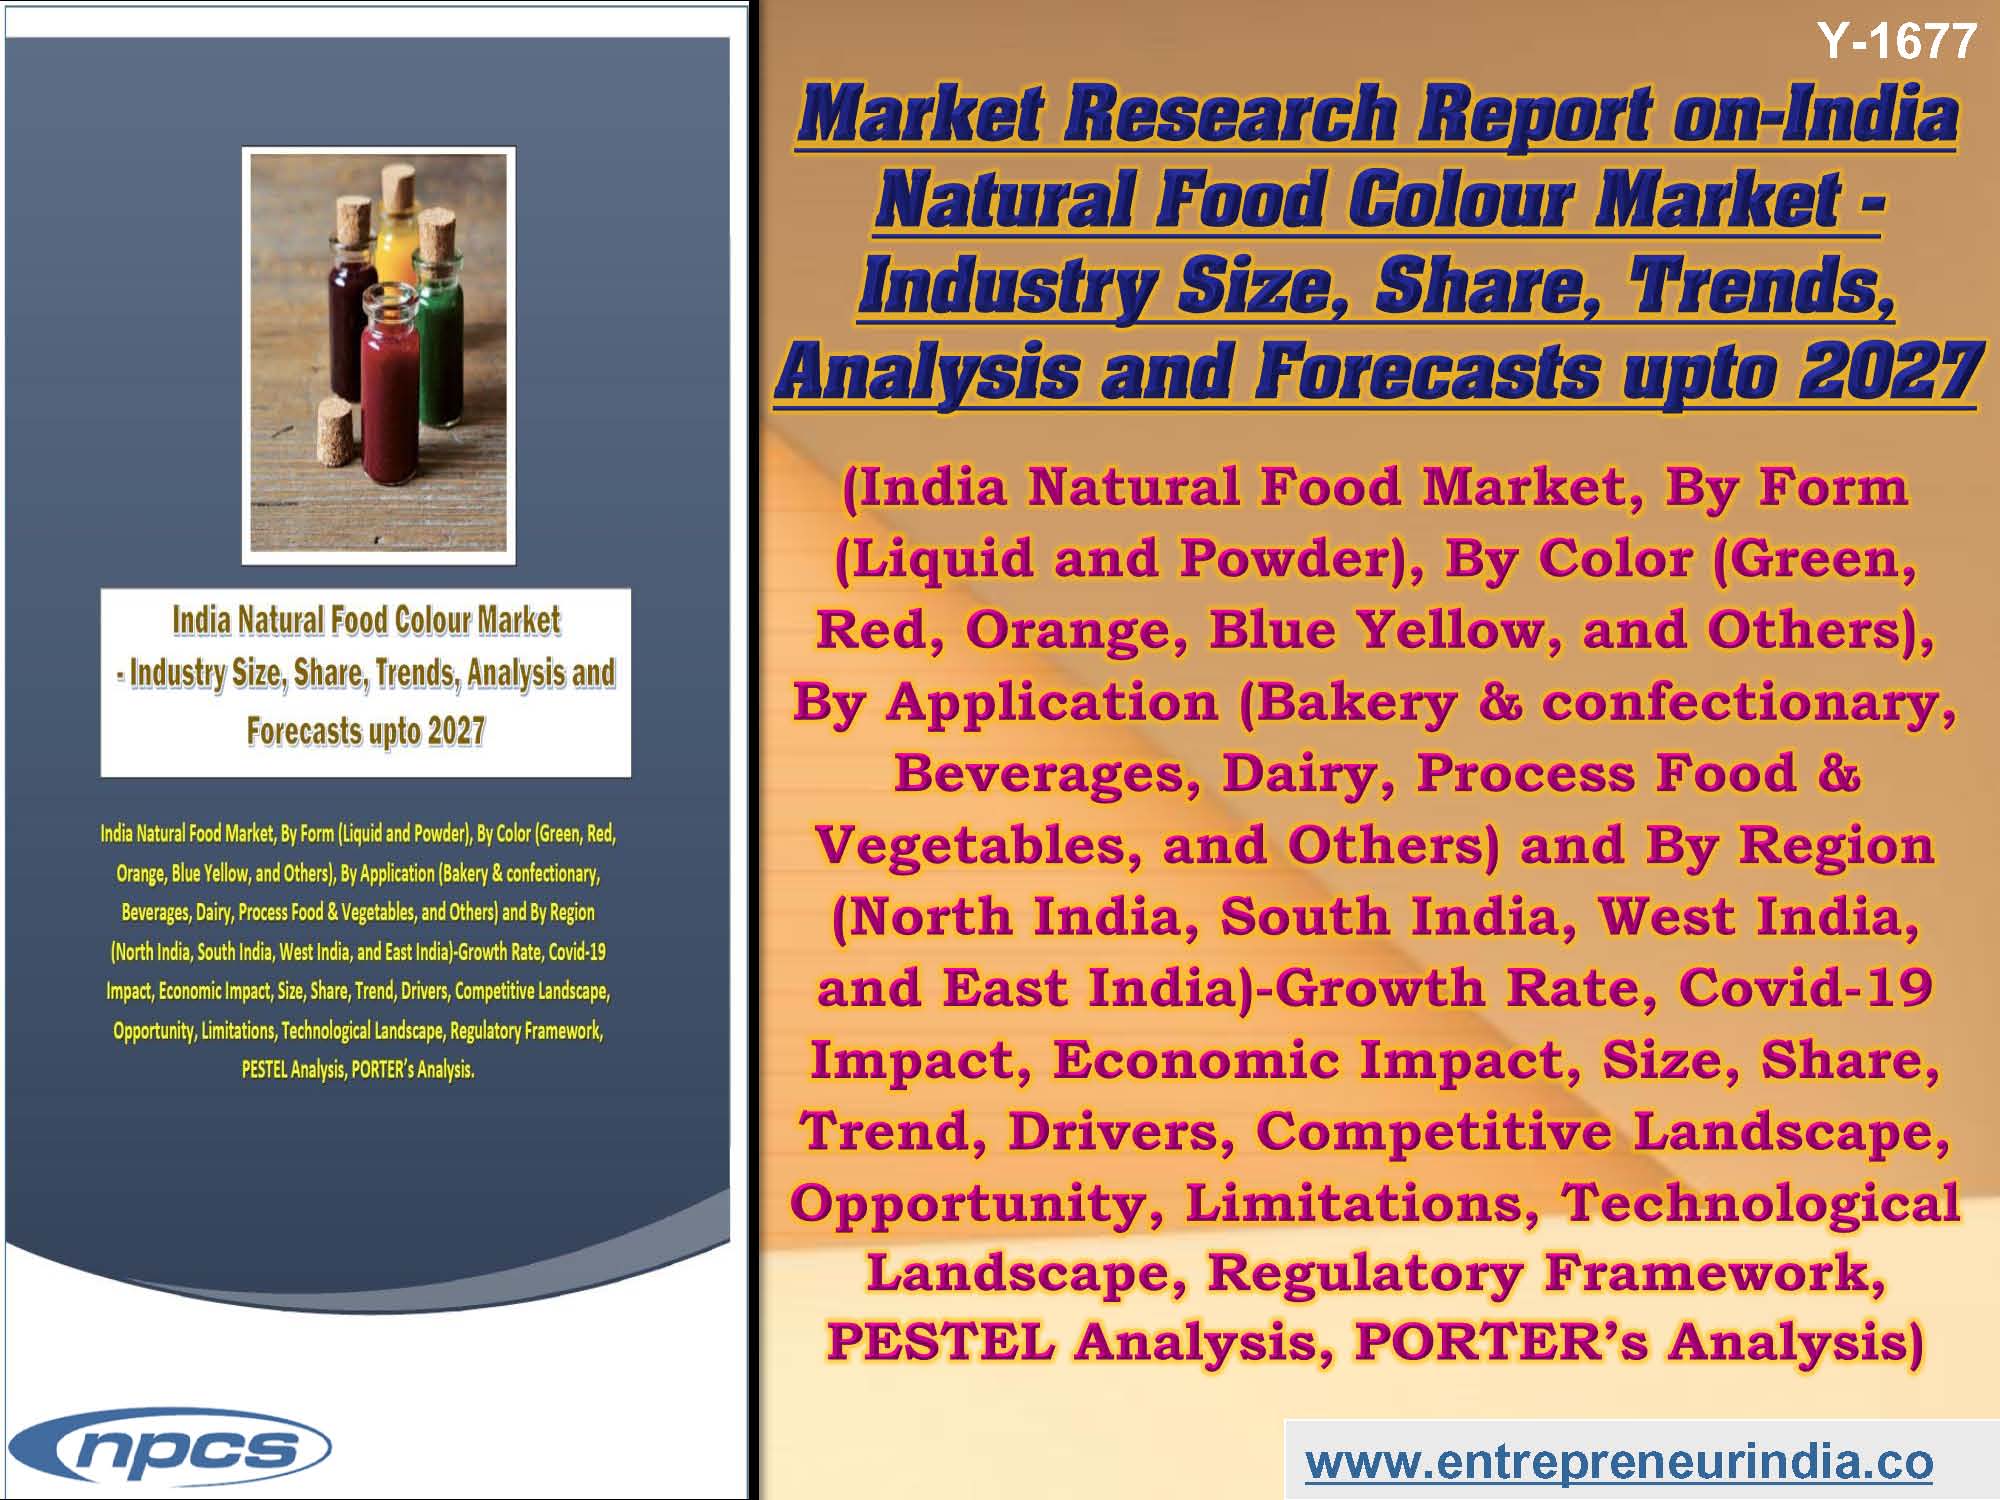 https://www.niir.org/blog/wp-content/uploads/2021/01/Market-Research-Report-on-India-Natural-Food-Colour-.jpg